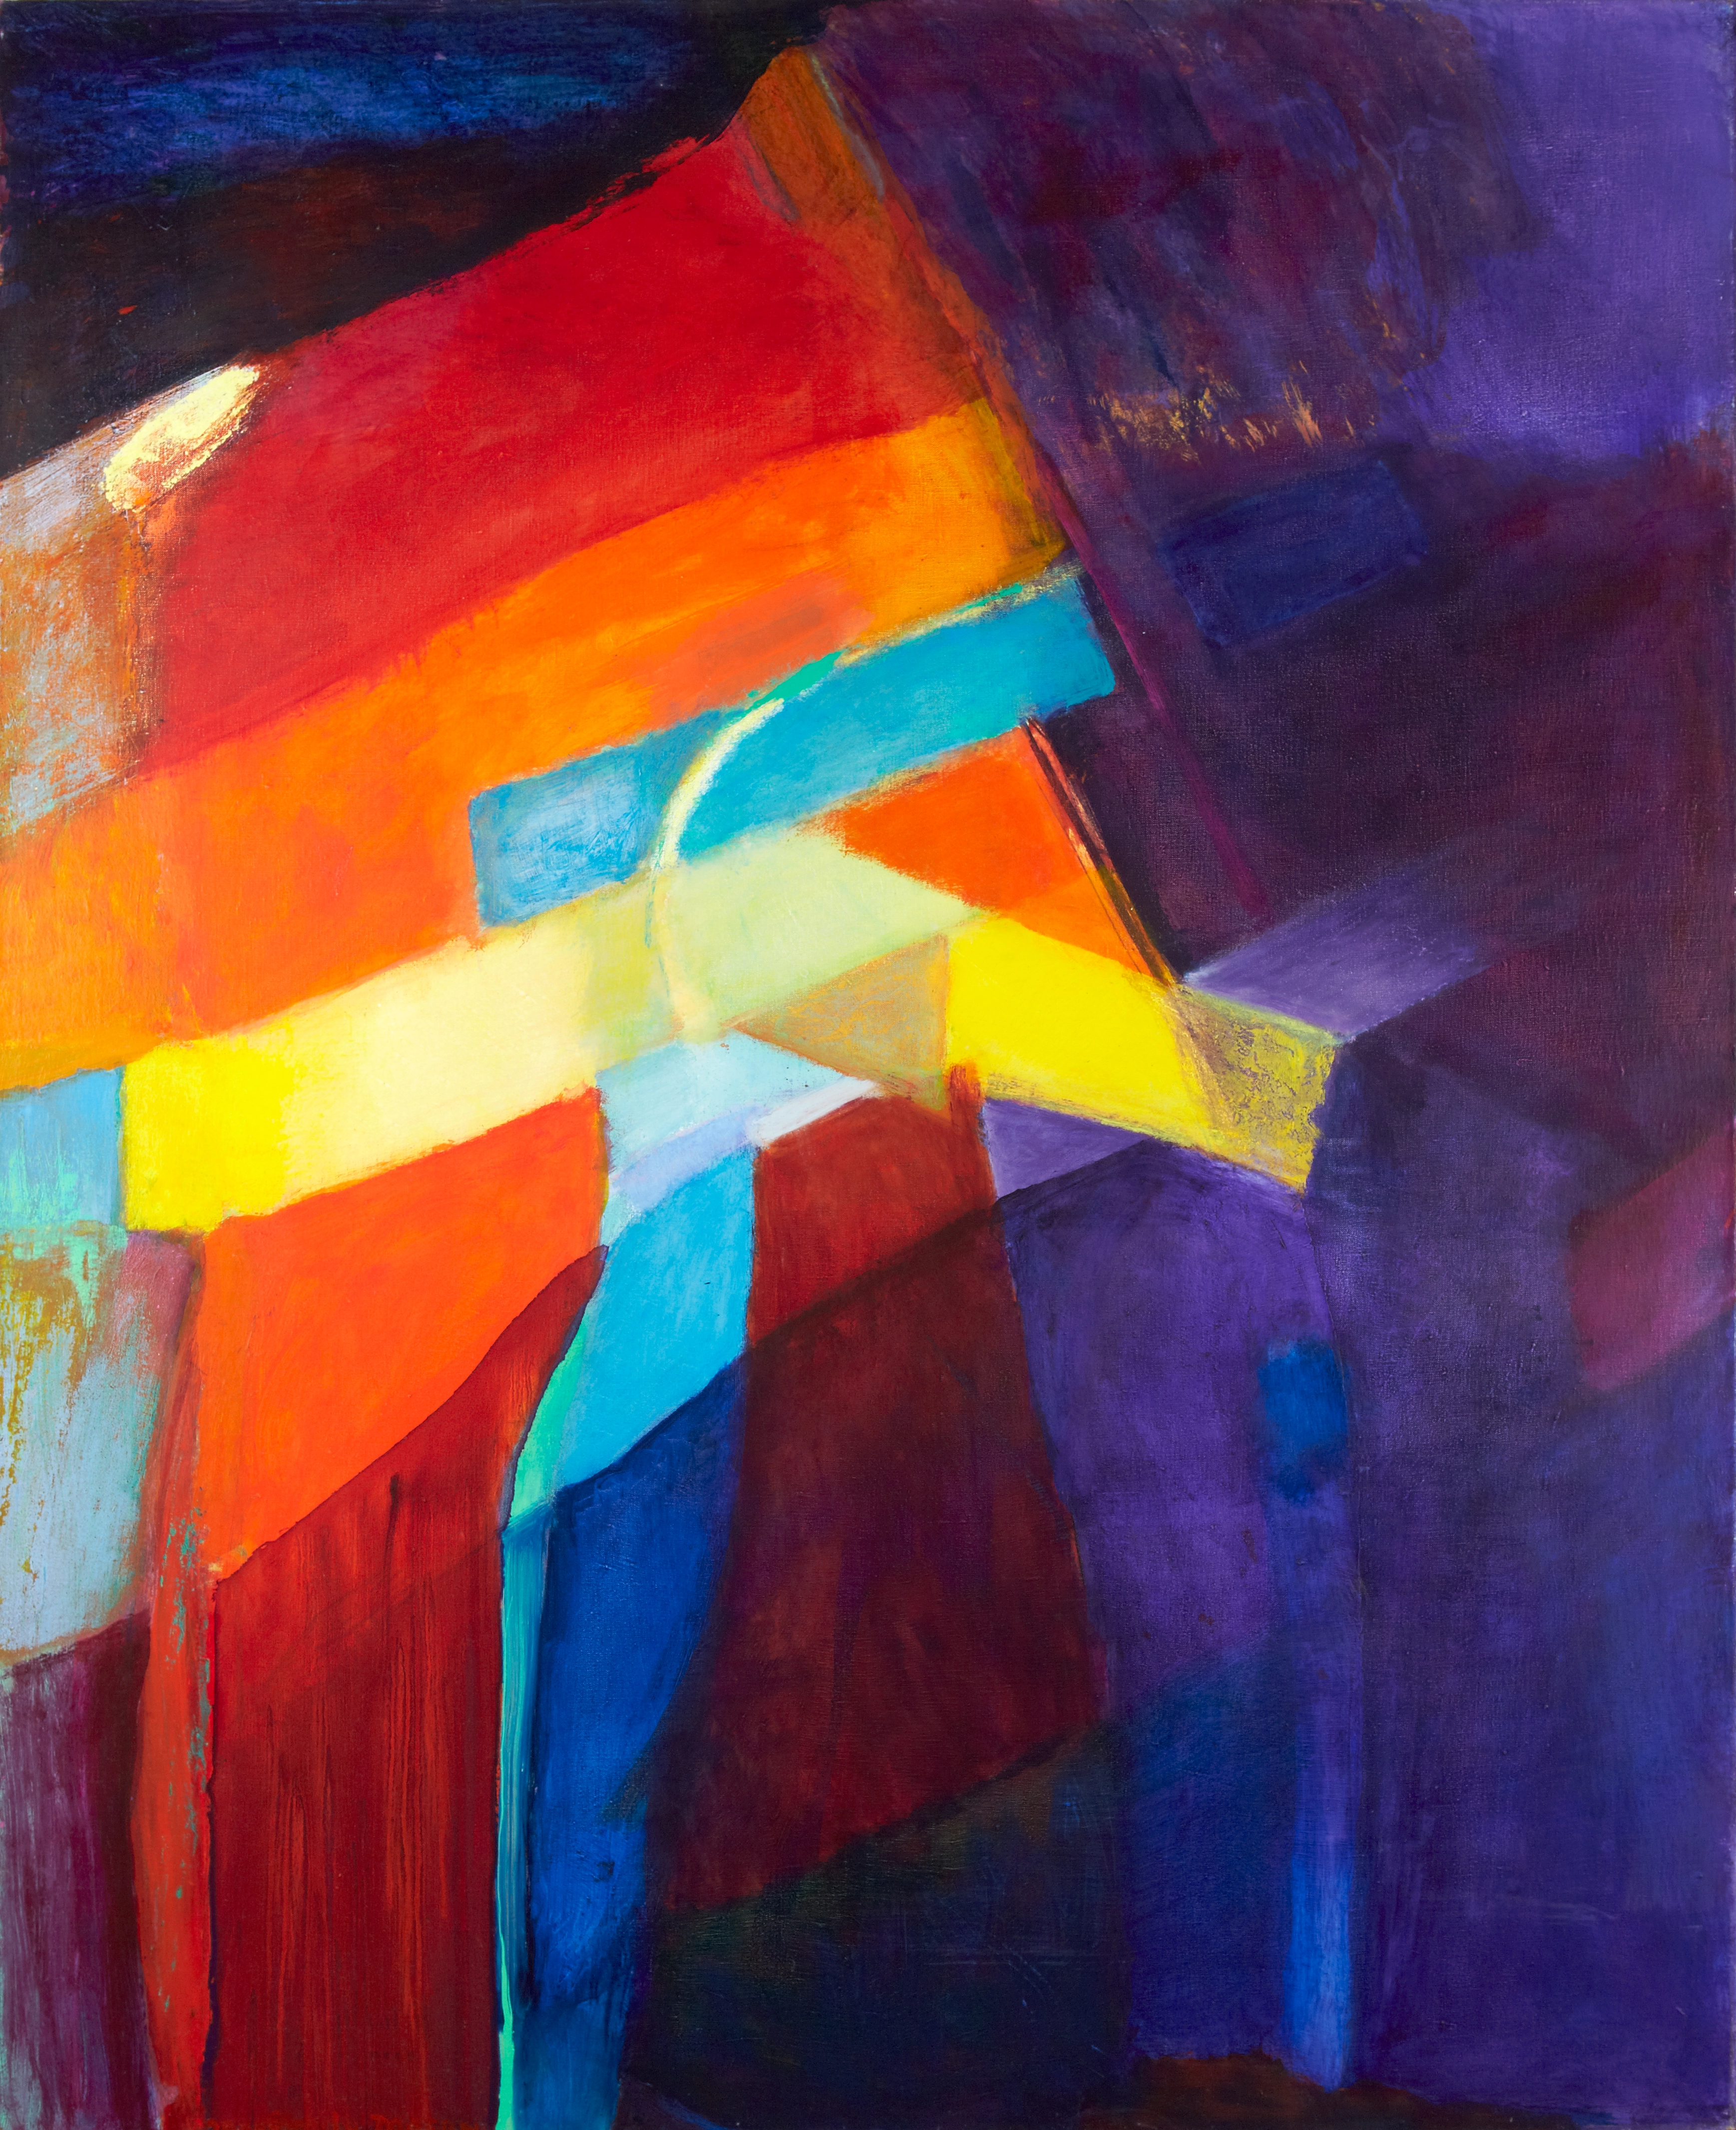 Abstract oil painting with a background of dark purples, and a large multi-colored block in the center-left of the canvas. This block of color is horizontal strips of red, orange, blue, and yellow, which all drip downward toward the bottom of the painting.